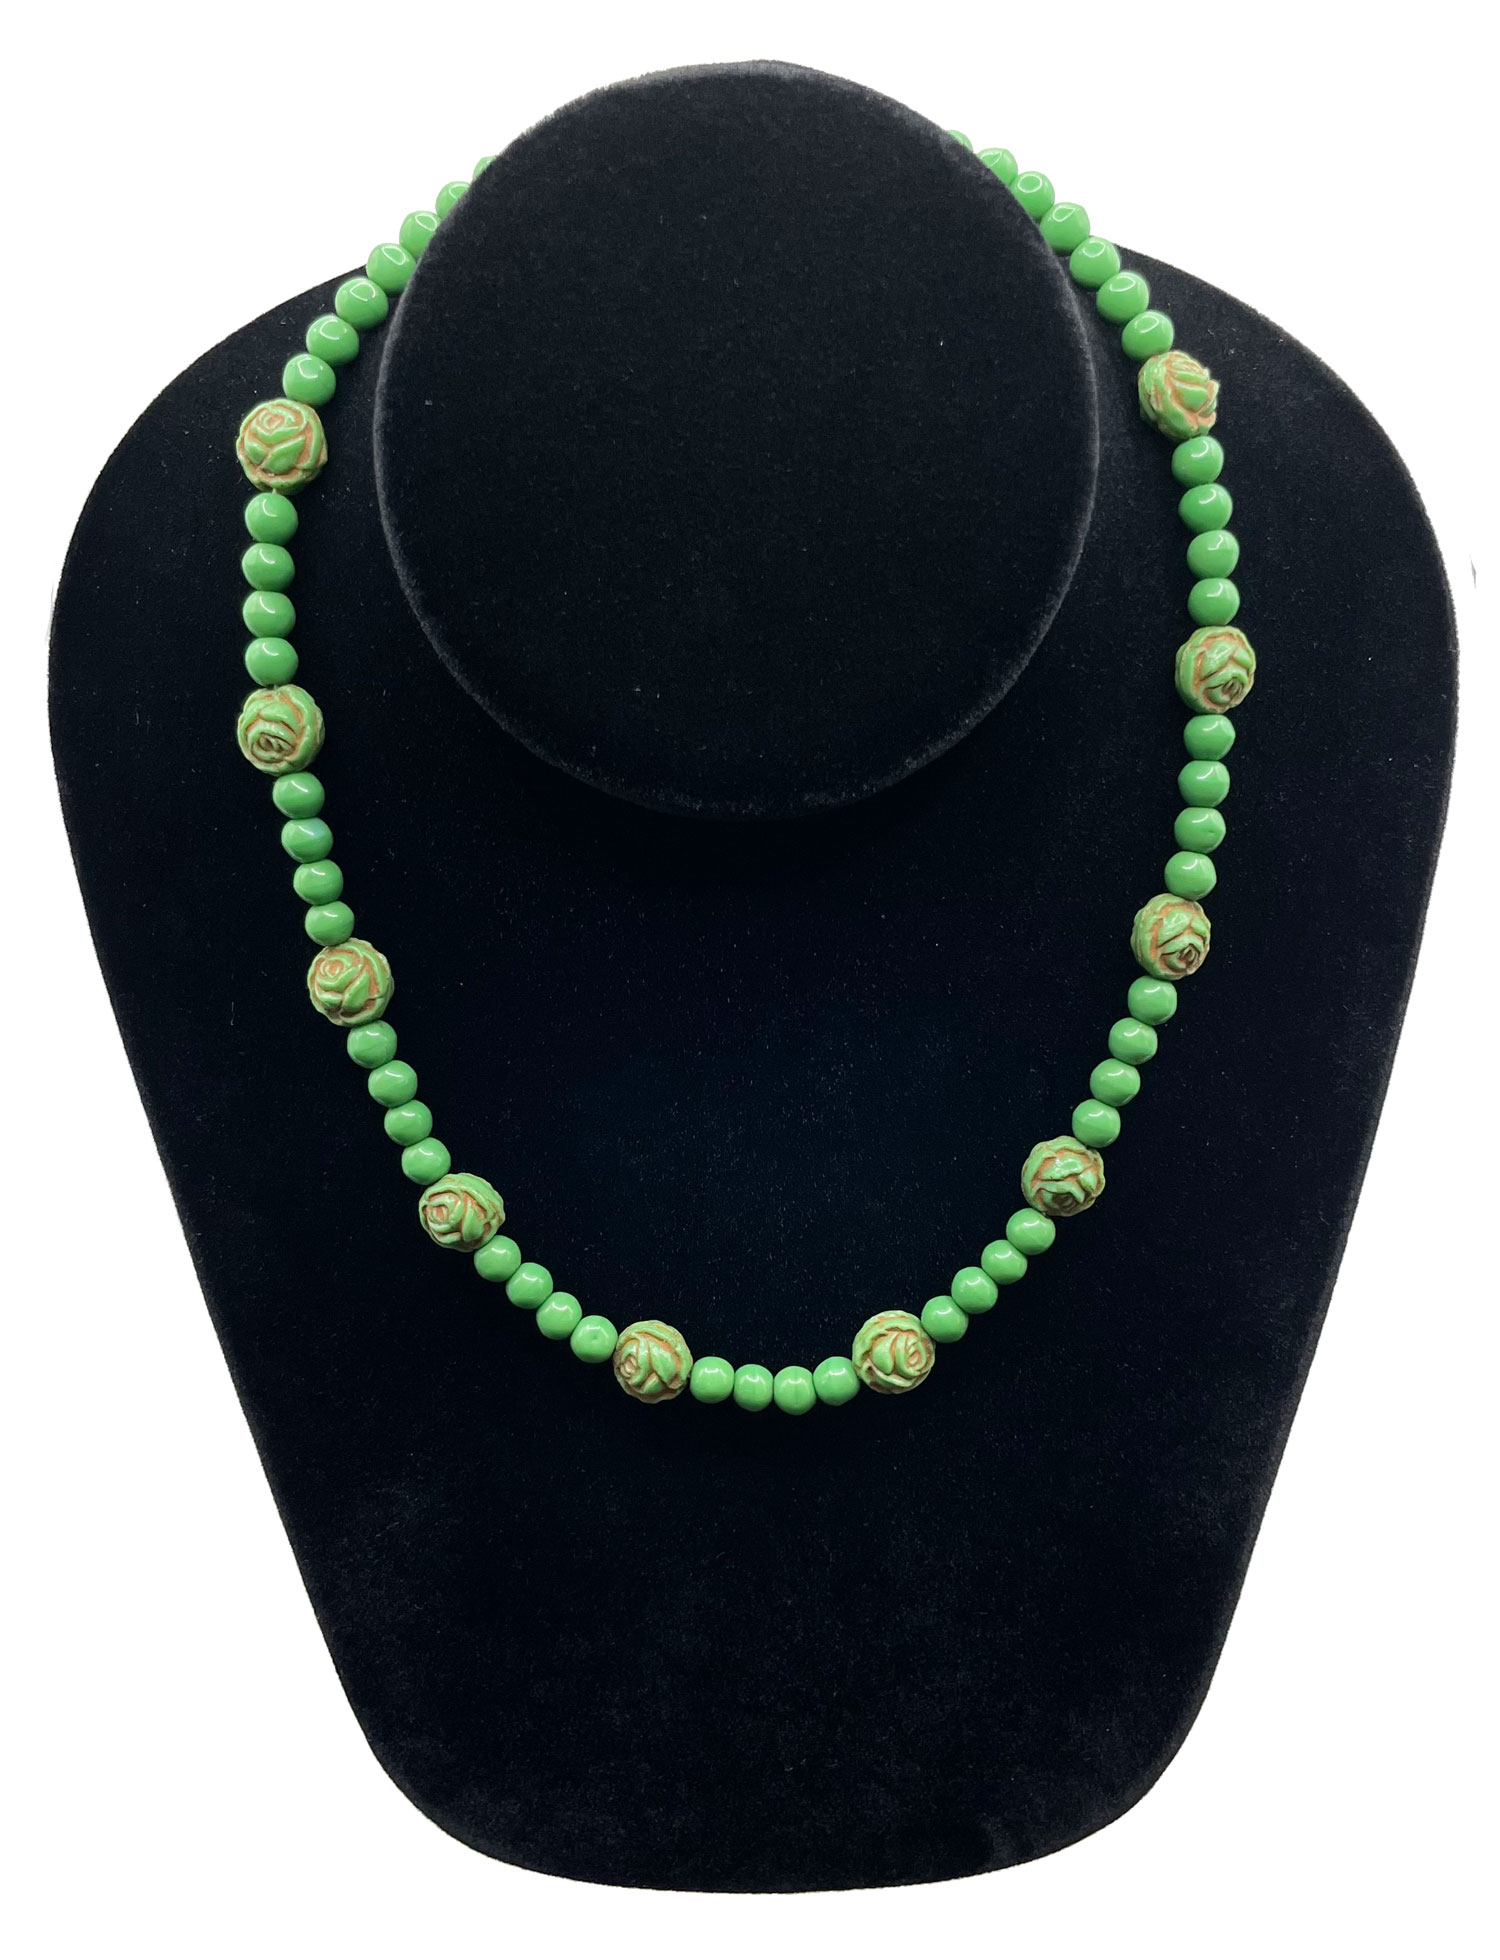 Green glass rose bead necklace